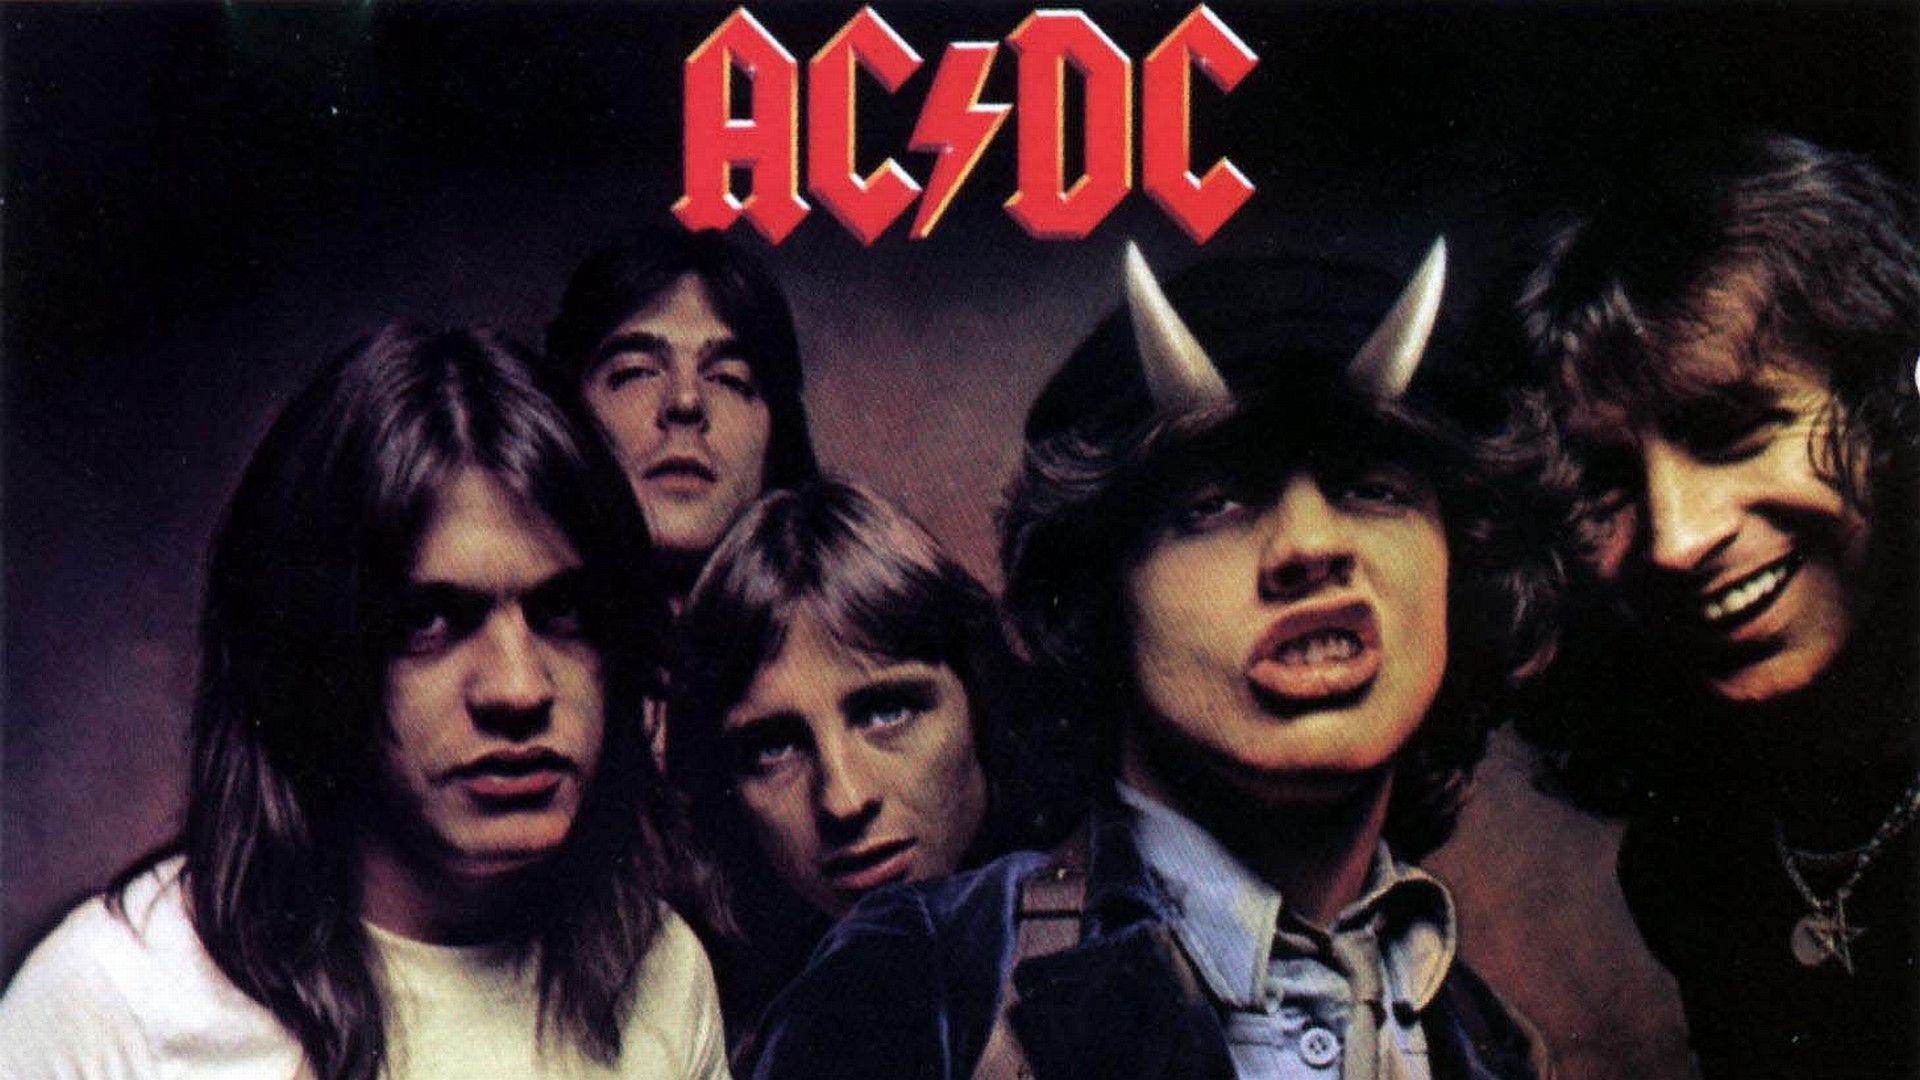 1920x1080 73 AC/DC Wallpapers | AC/DC Backgrounds